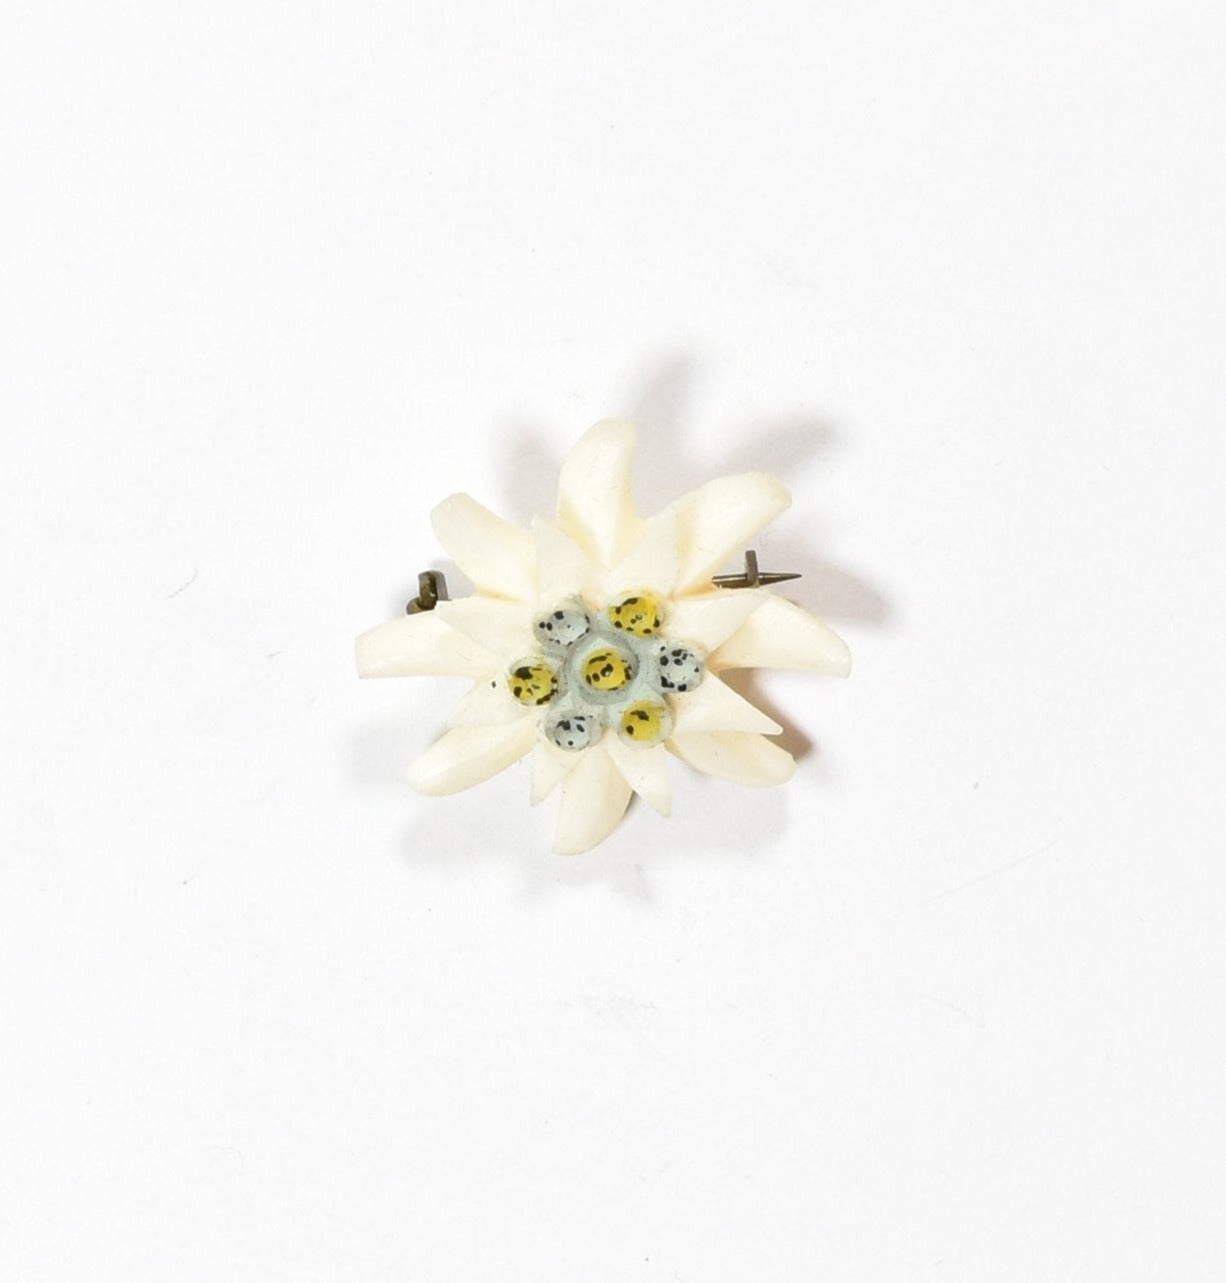 Vintage Plastic Pin Collectible Vintage Pin Used Plastic white flower Pin